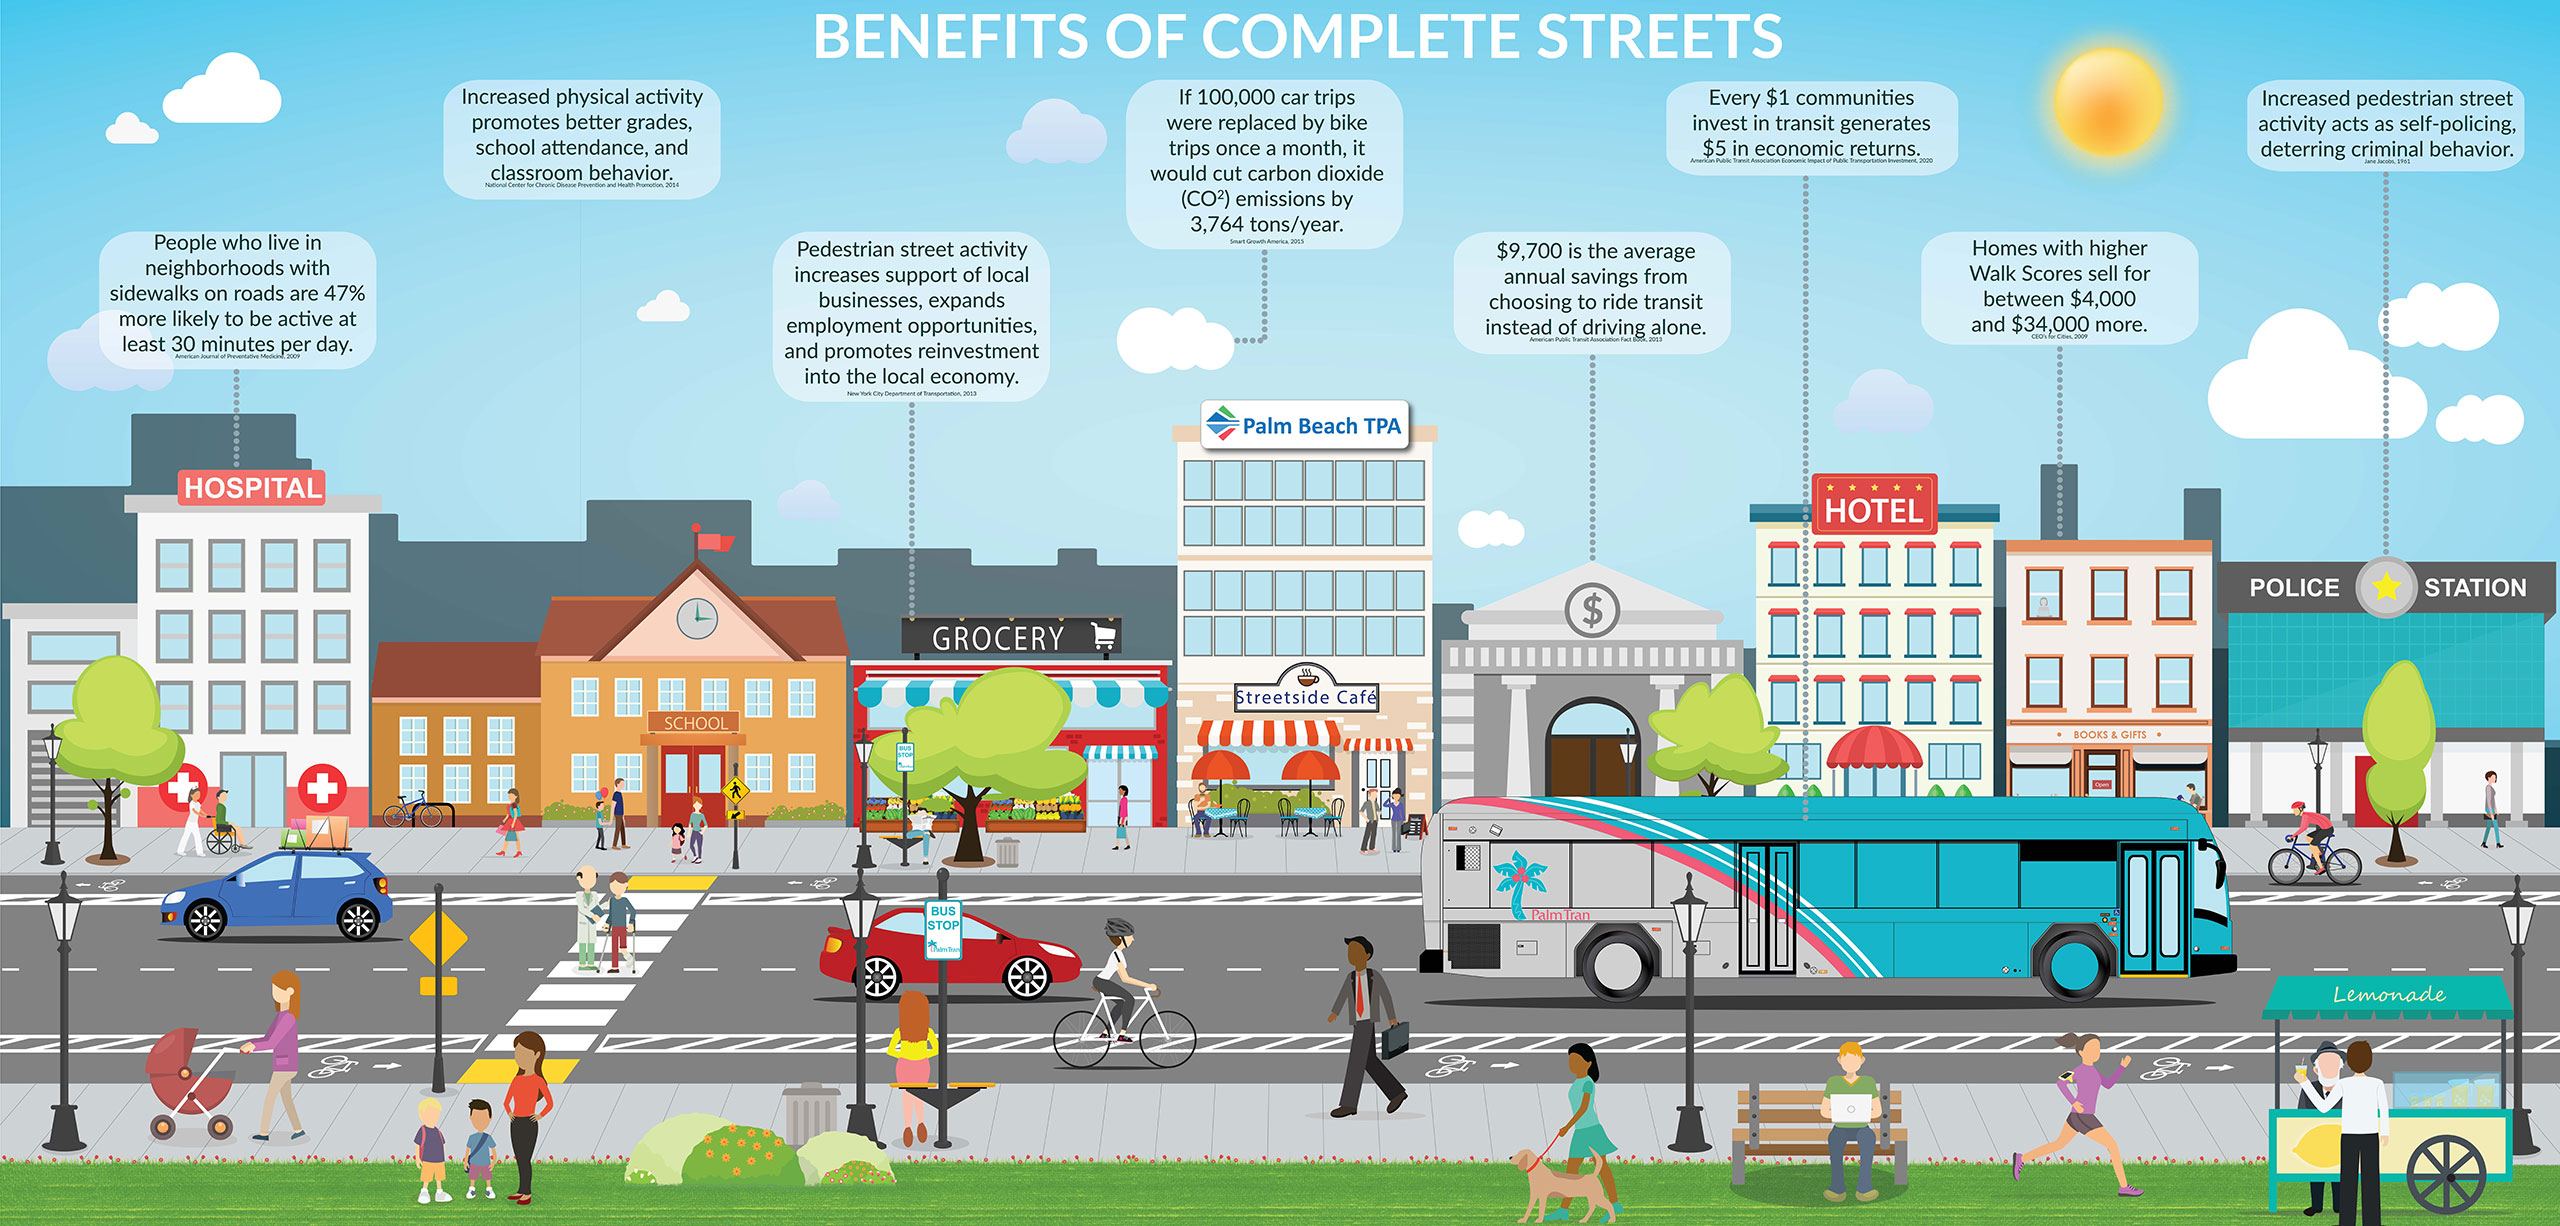 Benefits of Complete Streets Infographic